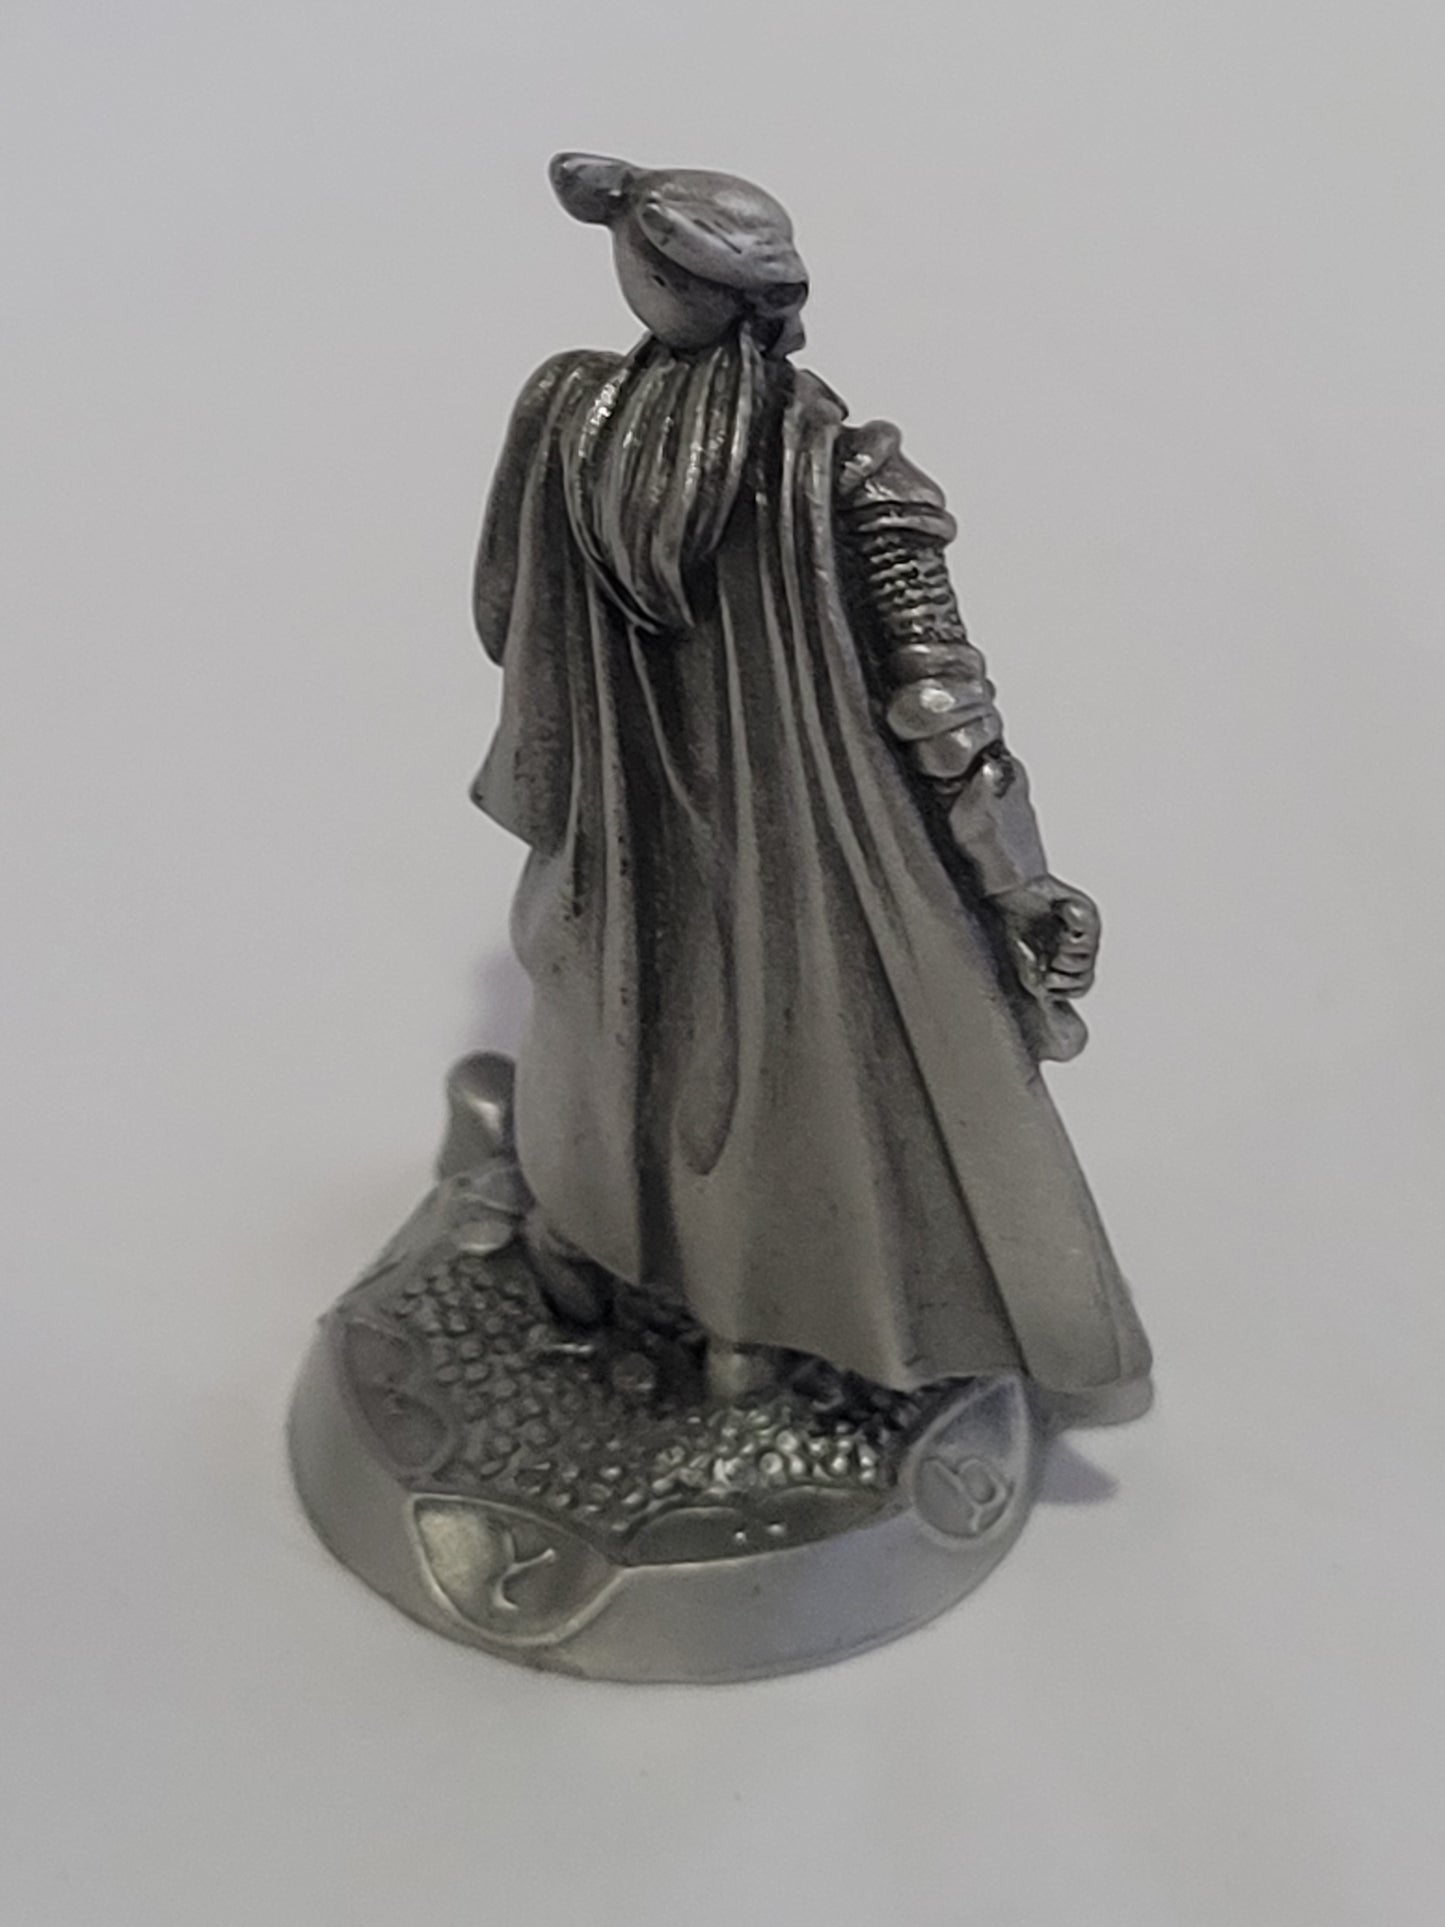 Celeborn from the Lord of the Rings by Rawcliffe, Pewter Figurine